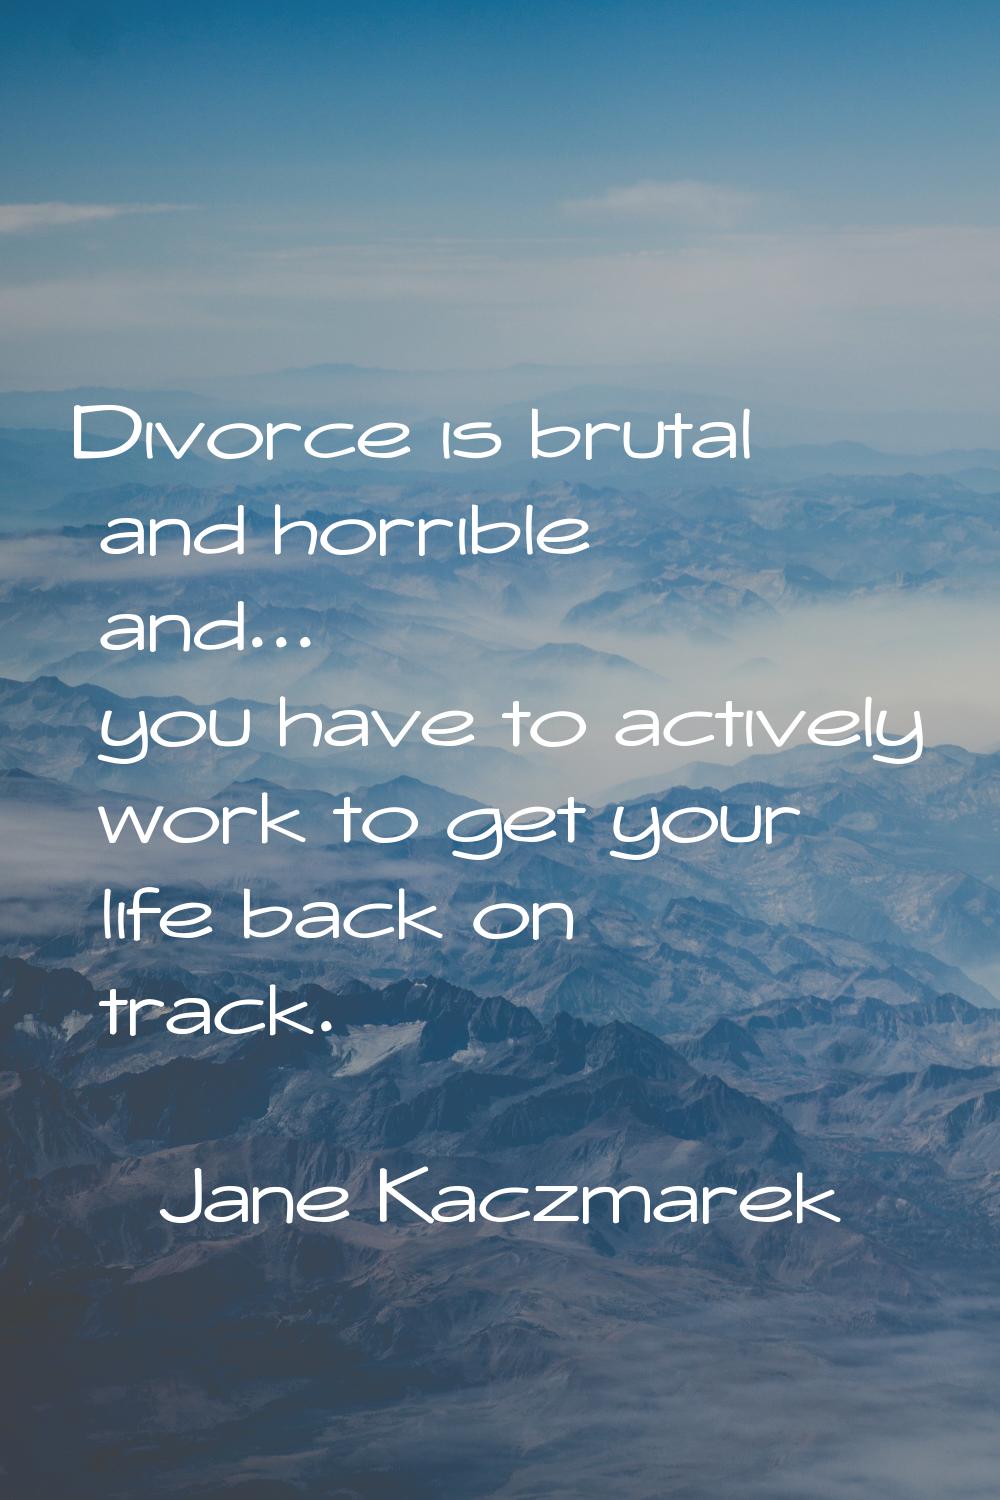 Divorce is brutal and horrible and... you have to actively work to get your life back on track.